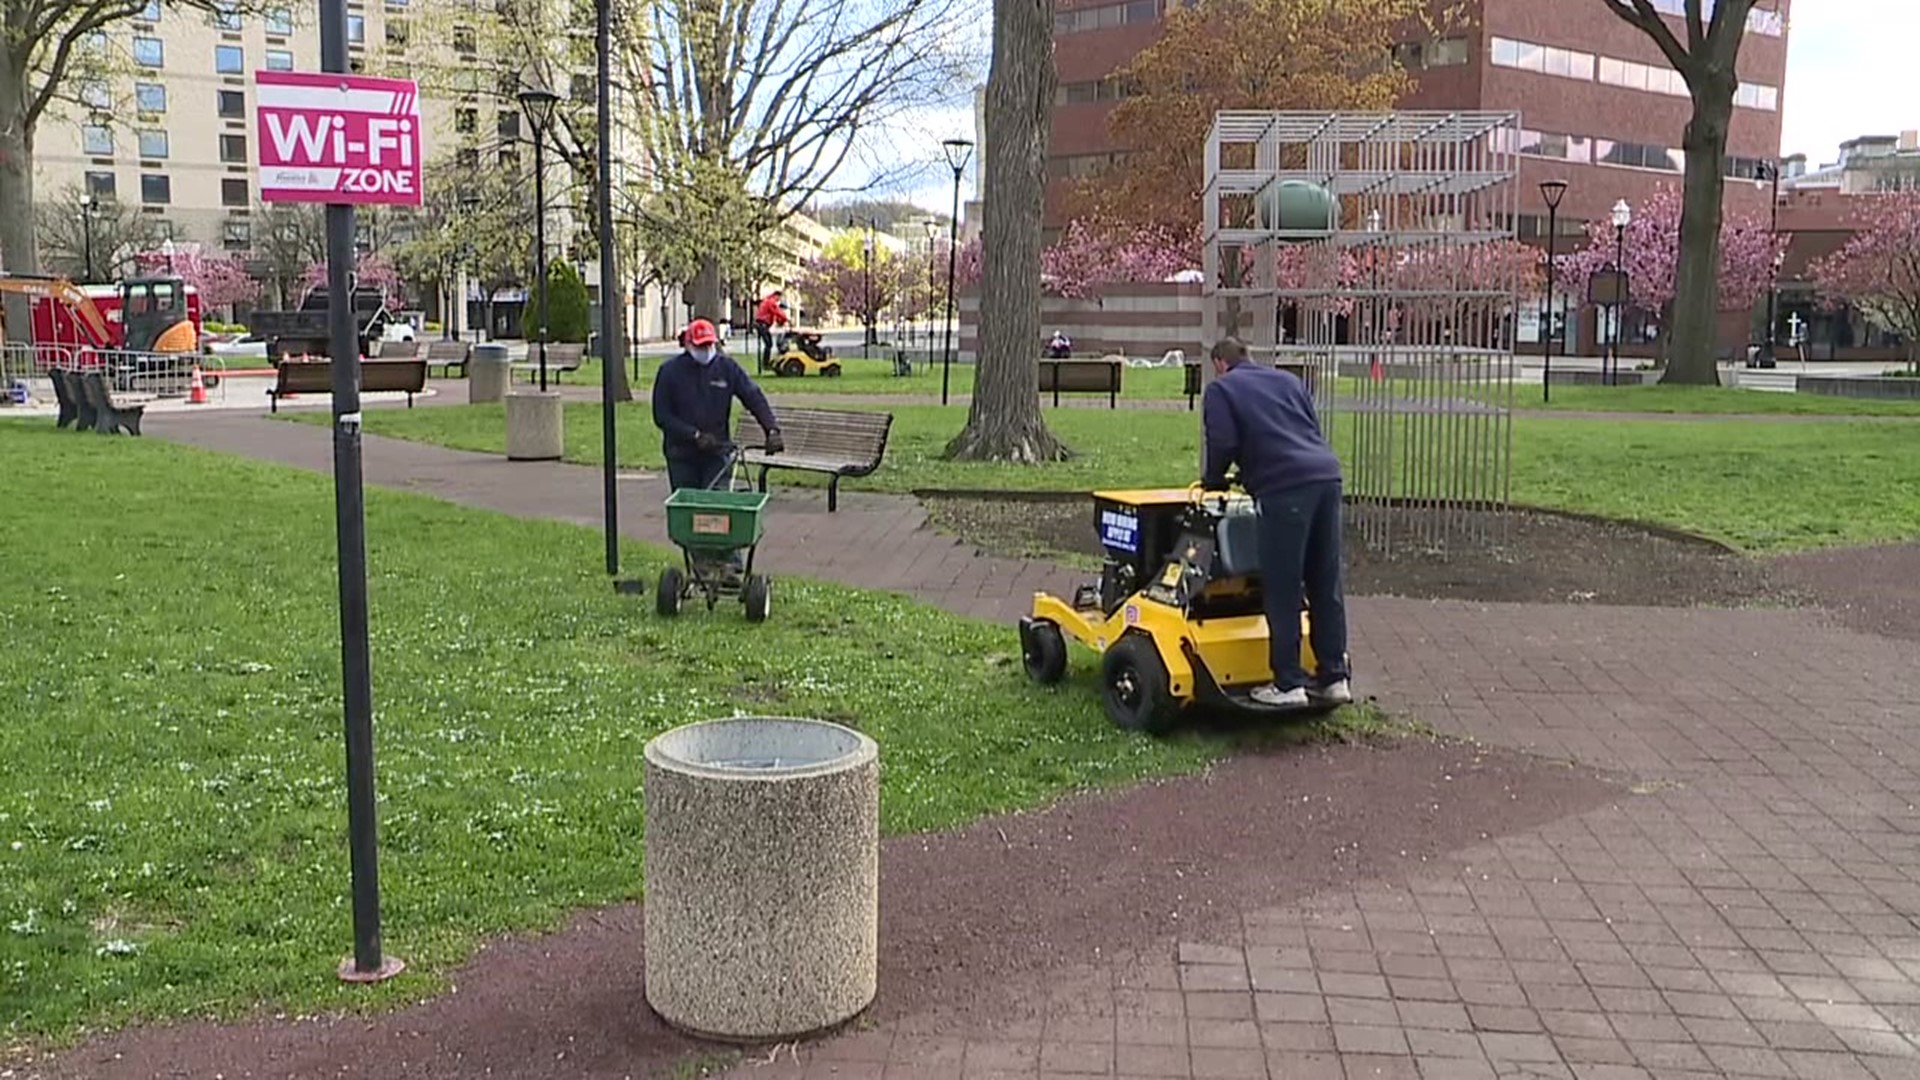 Workers spent Thursday morning taking care of the environment in downtown Wilkes-Barre.